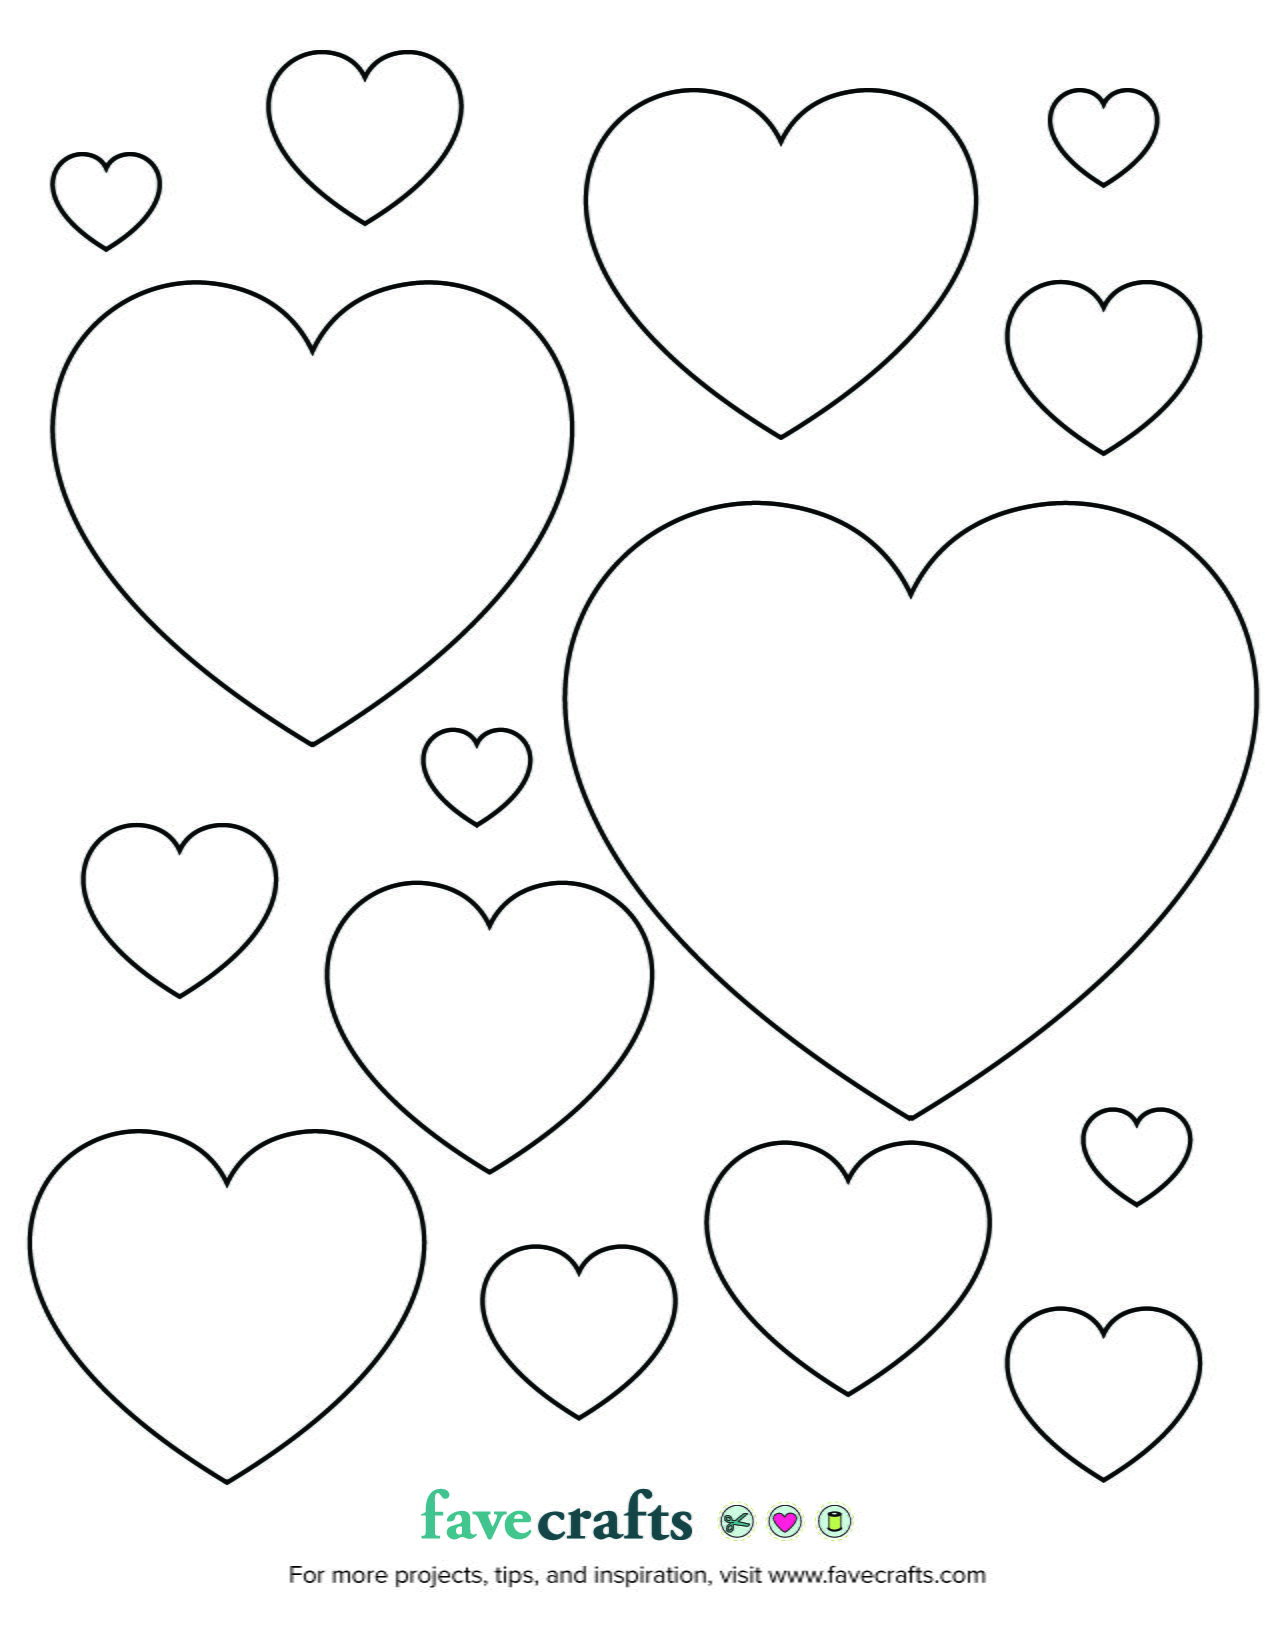 hearts-free-printable-templates-coloring-pages-firstpalette-com